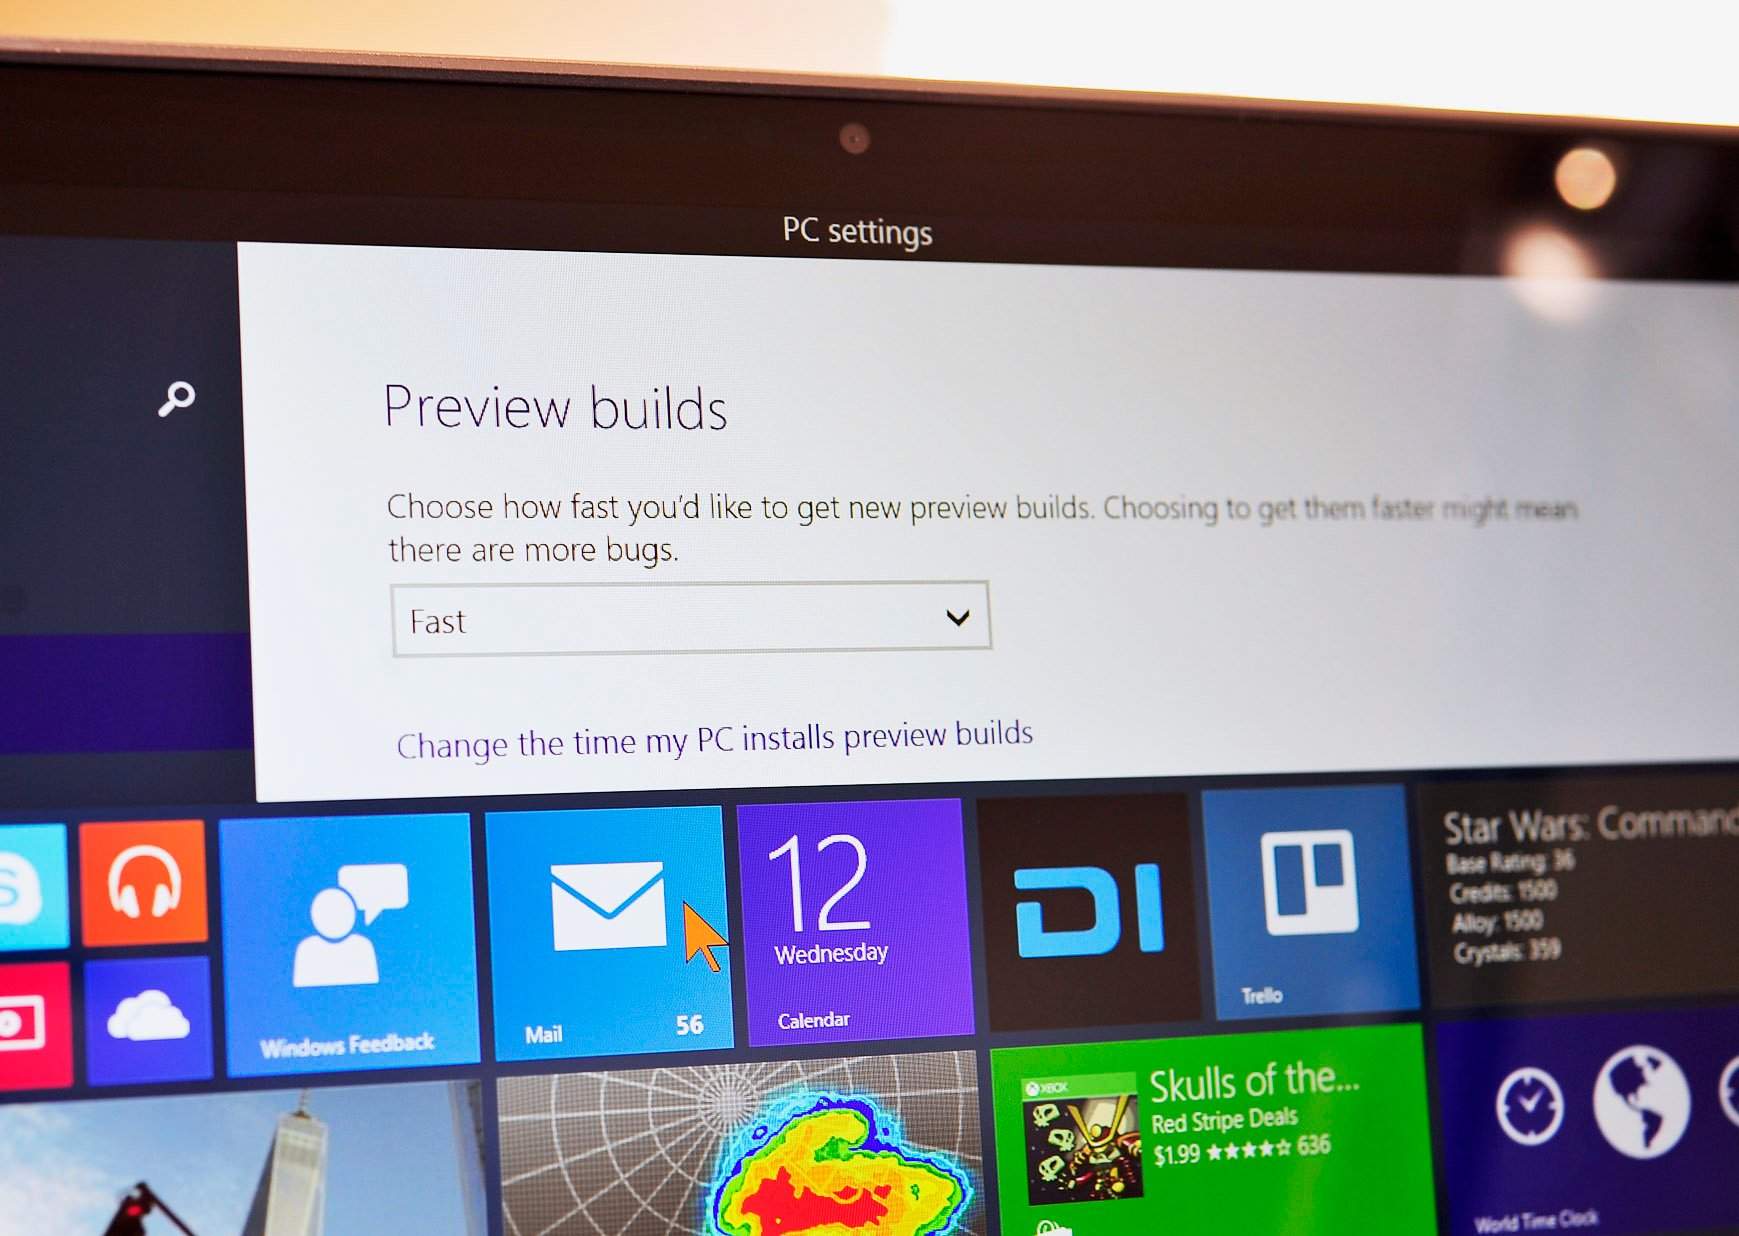 Your windows build. Windows 10 Technical Preview build 9901. Focused Windows. Installing Windows developer Preview.